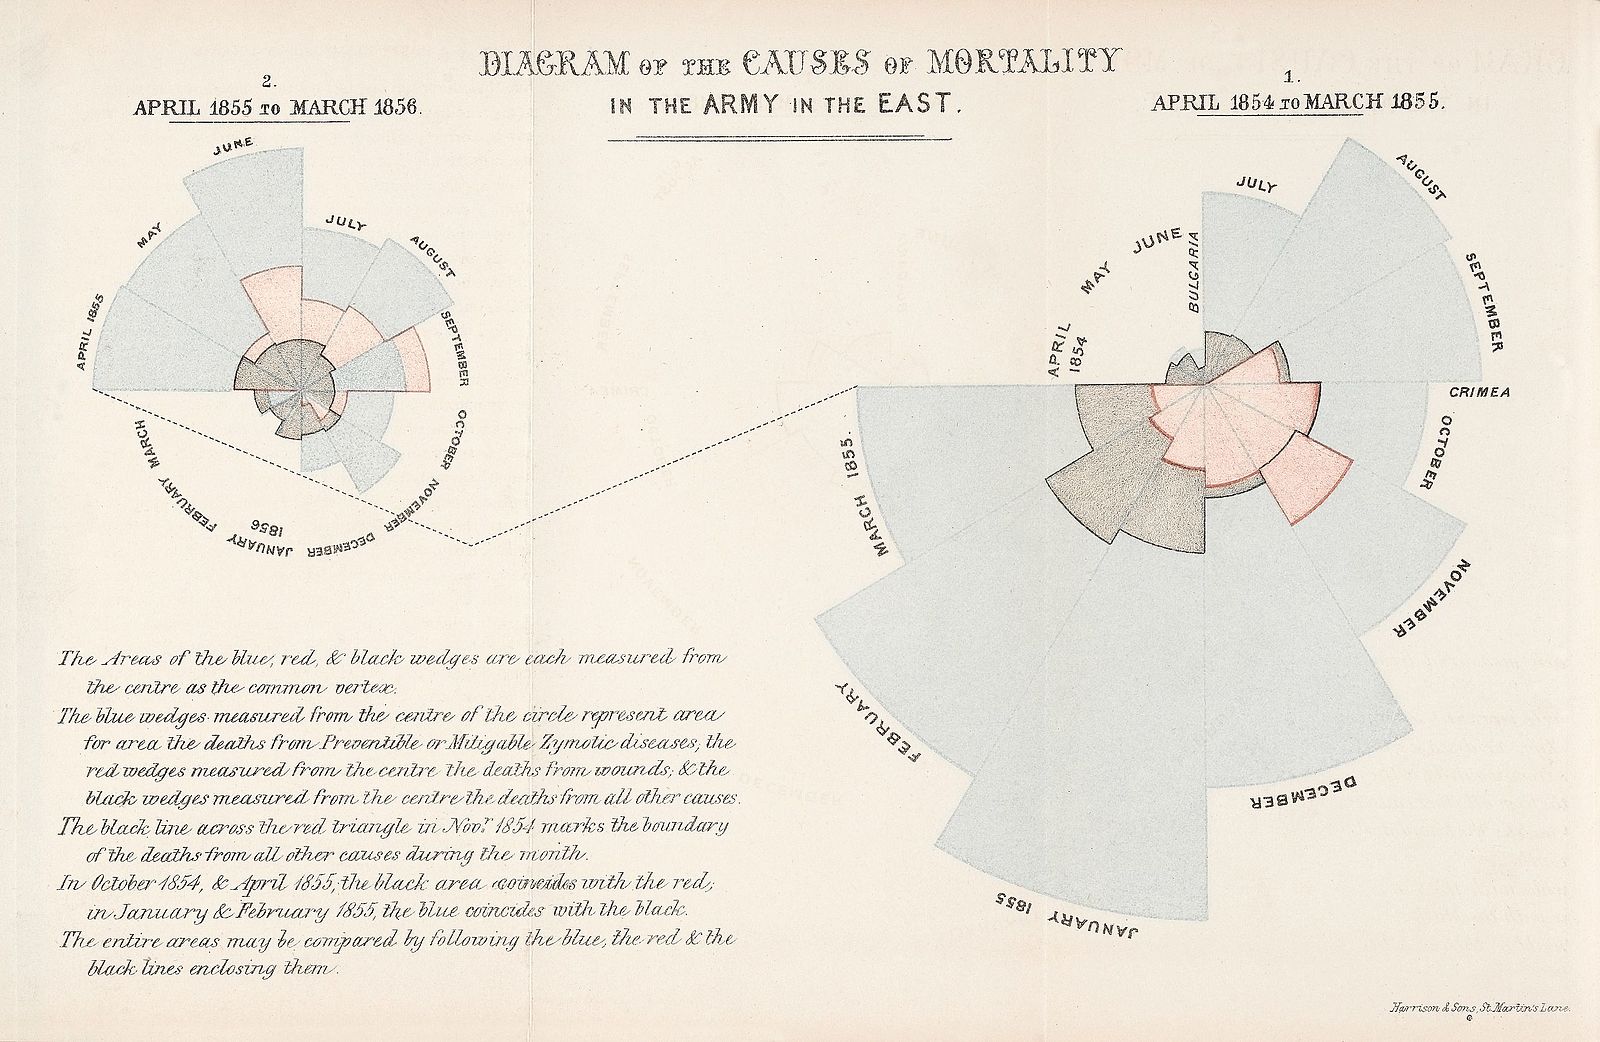 Diagram of the causes of mortality in the army in the east.